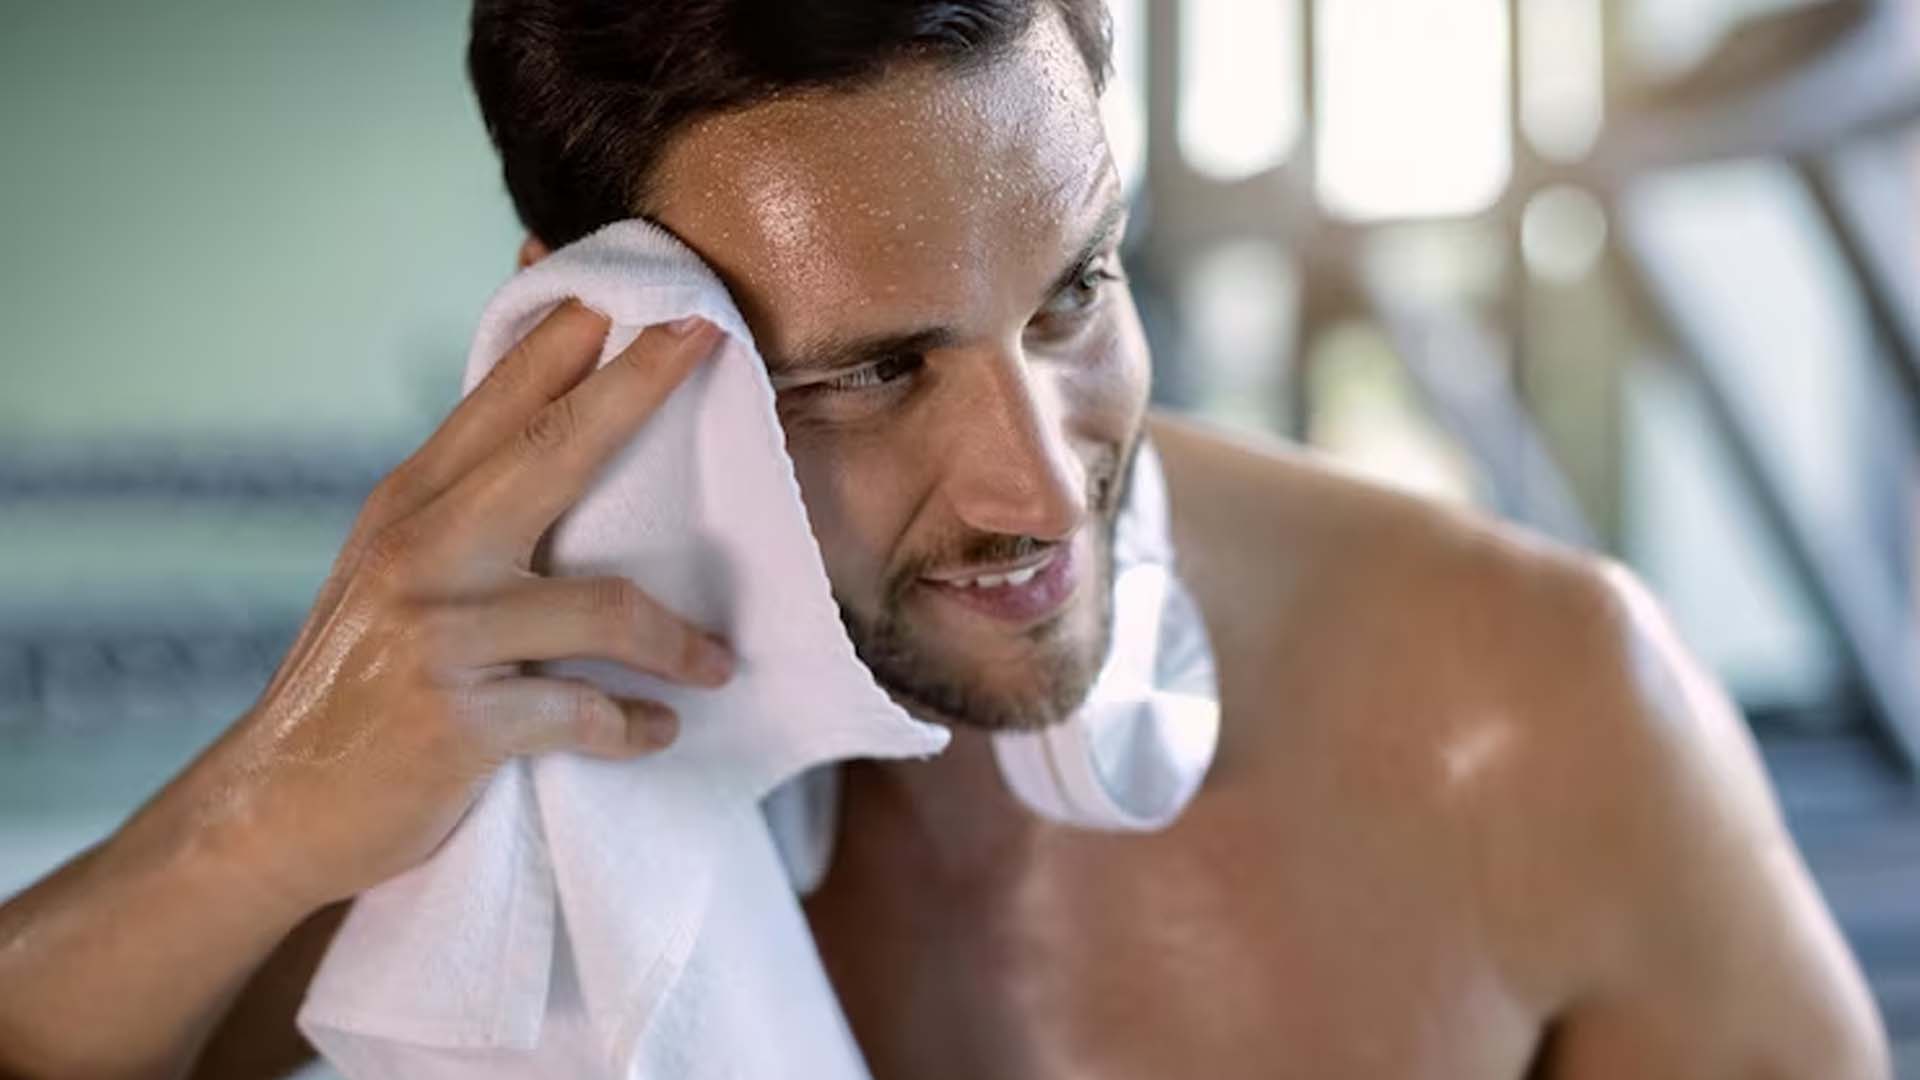 Does Sweating Cause Hair Loss?